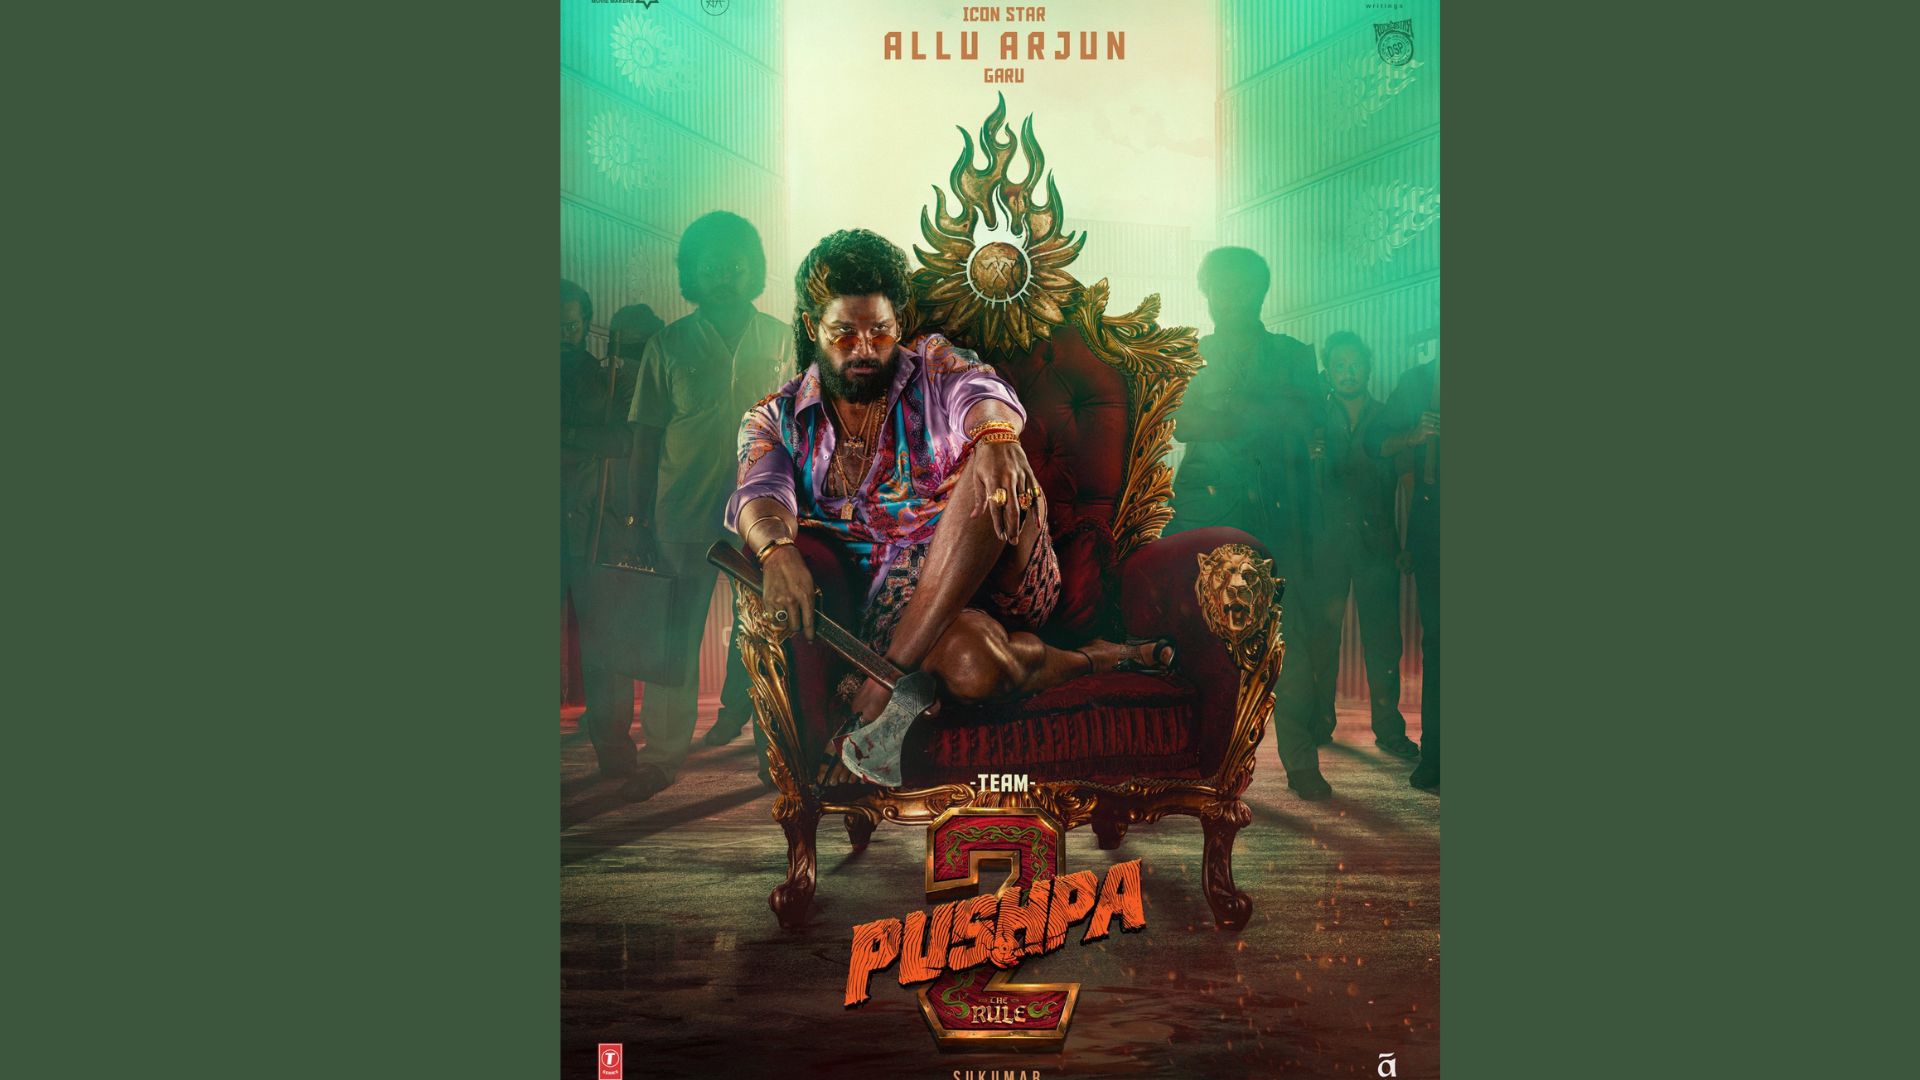 Pushpa 2: The Rule Teaser out now